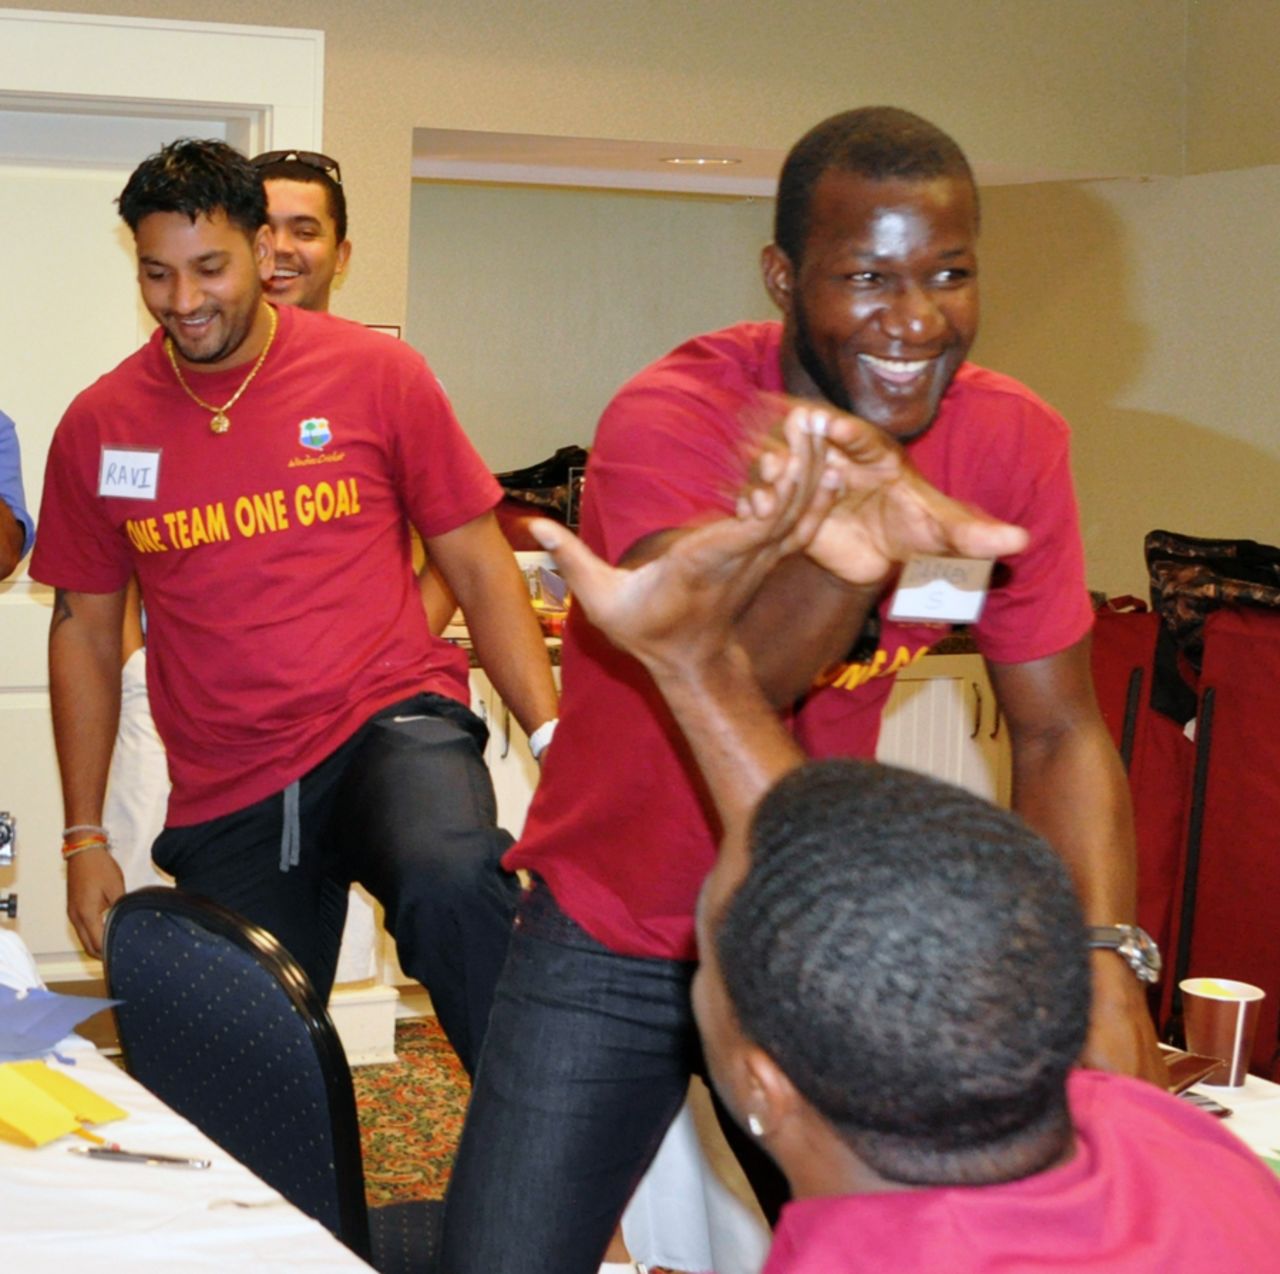 West Indies have some fun on their Elite Team Tour of the USA, Florida, October 21, 2013